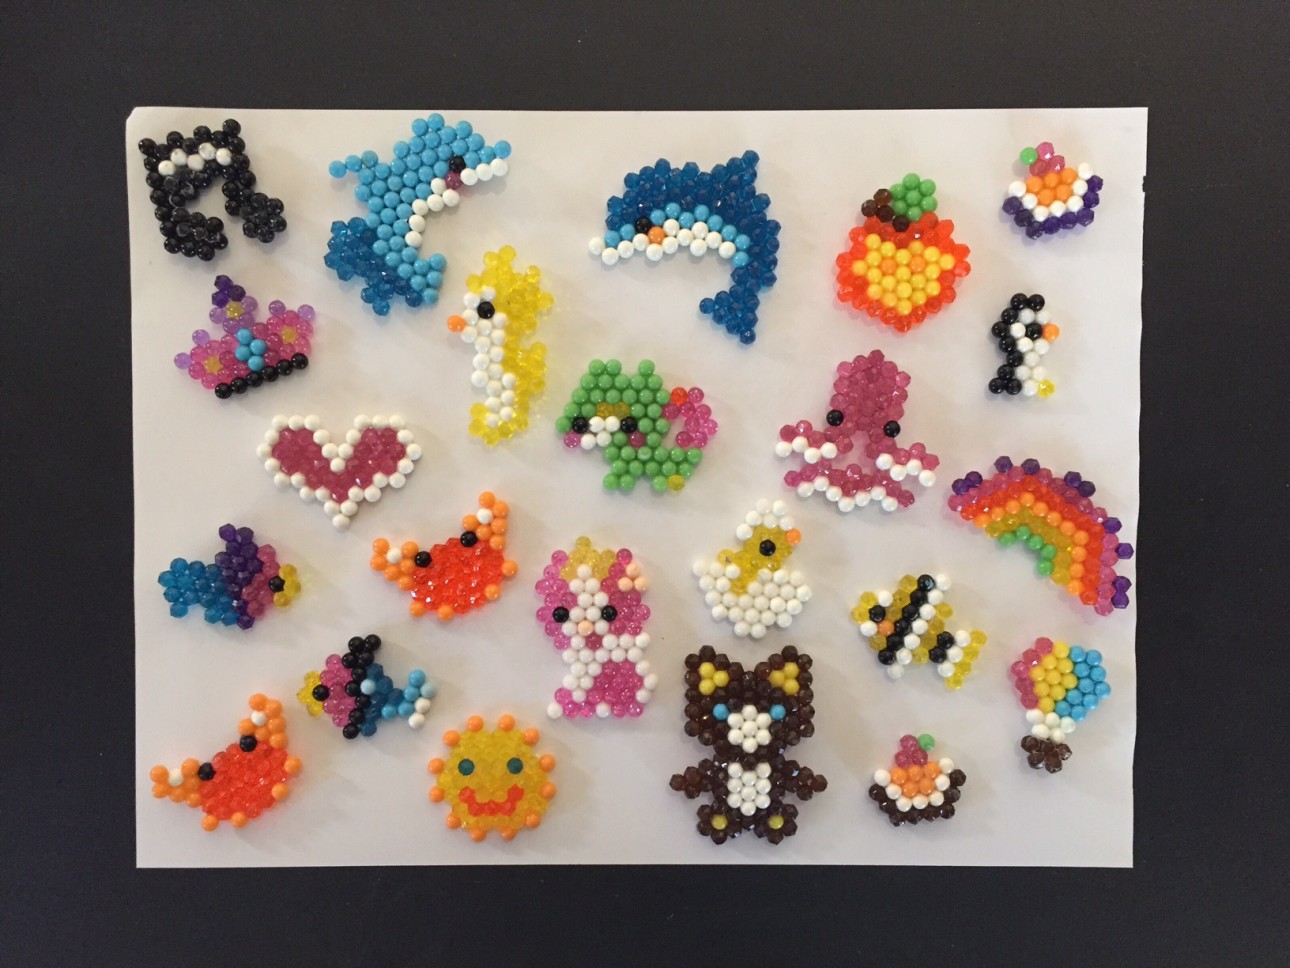 Fine Motor Skills with Aquabeads - Play and Learn Every Day